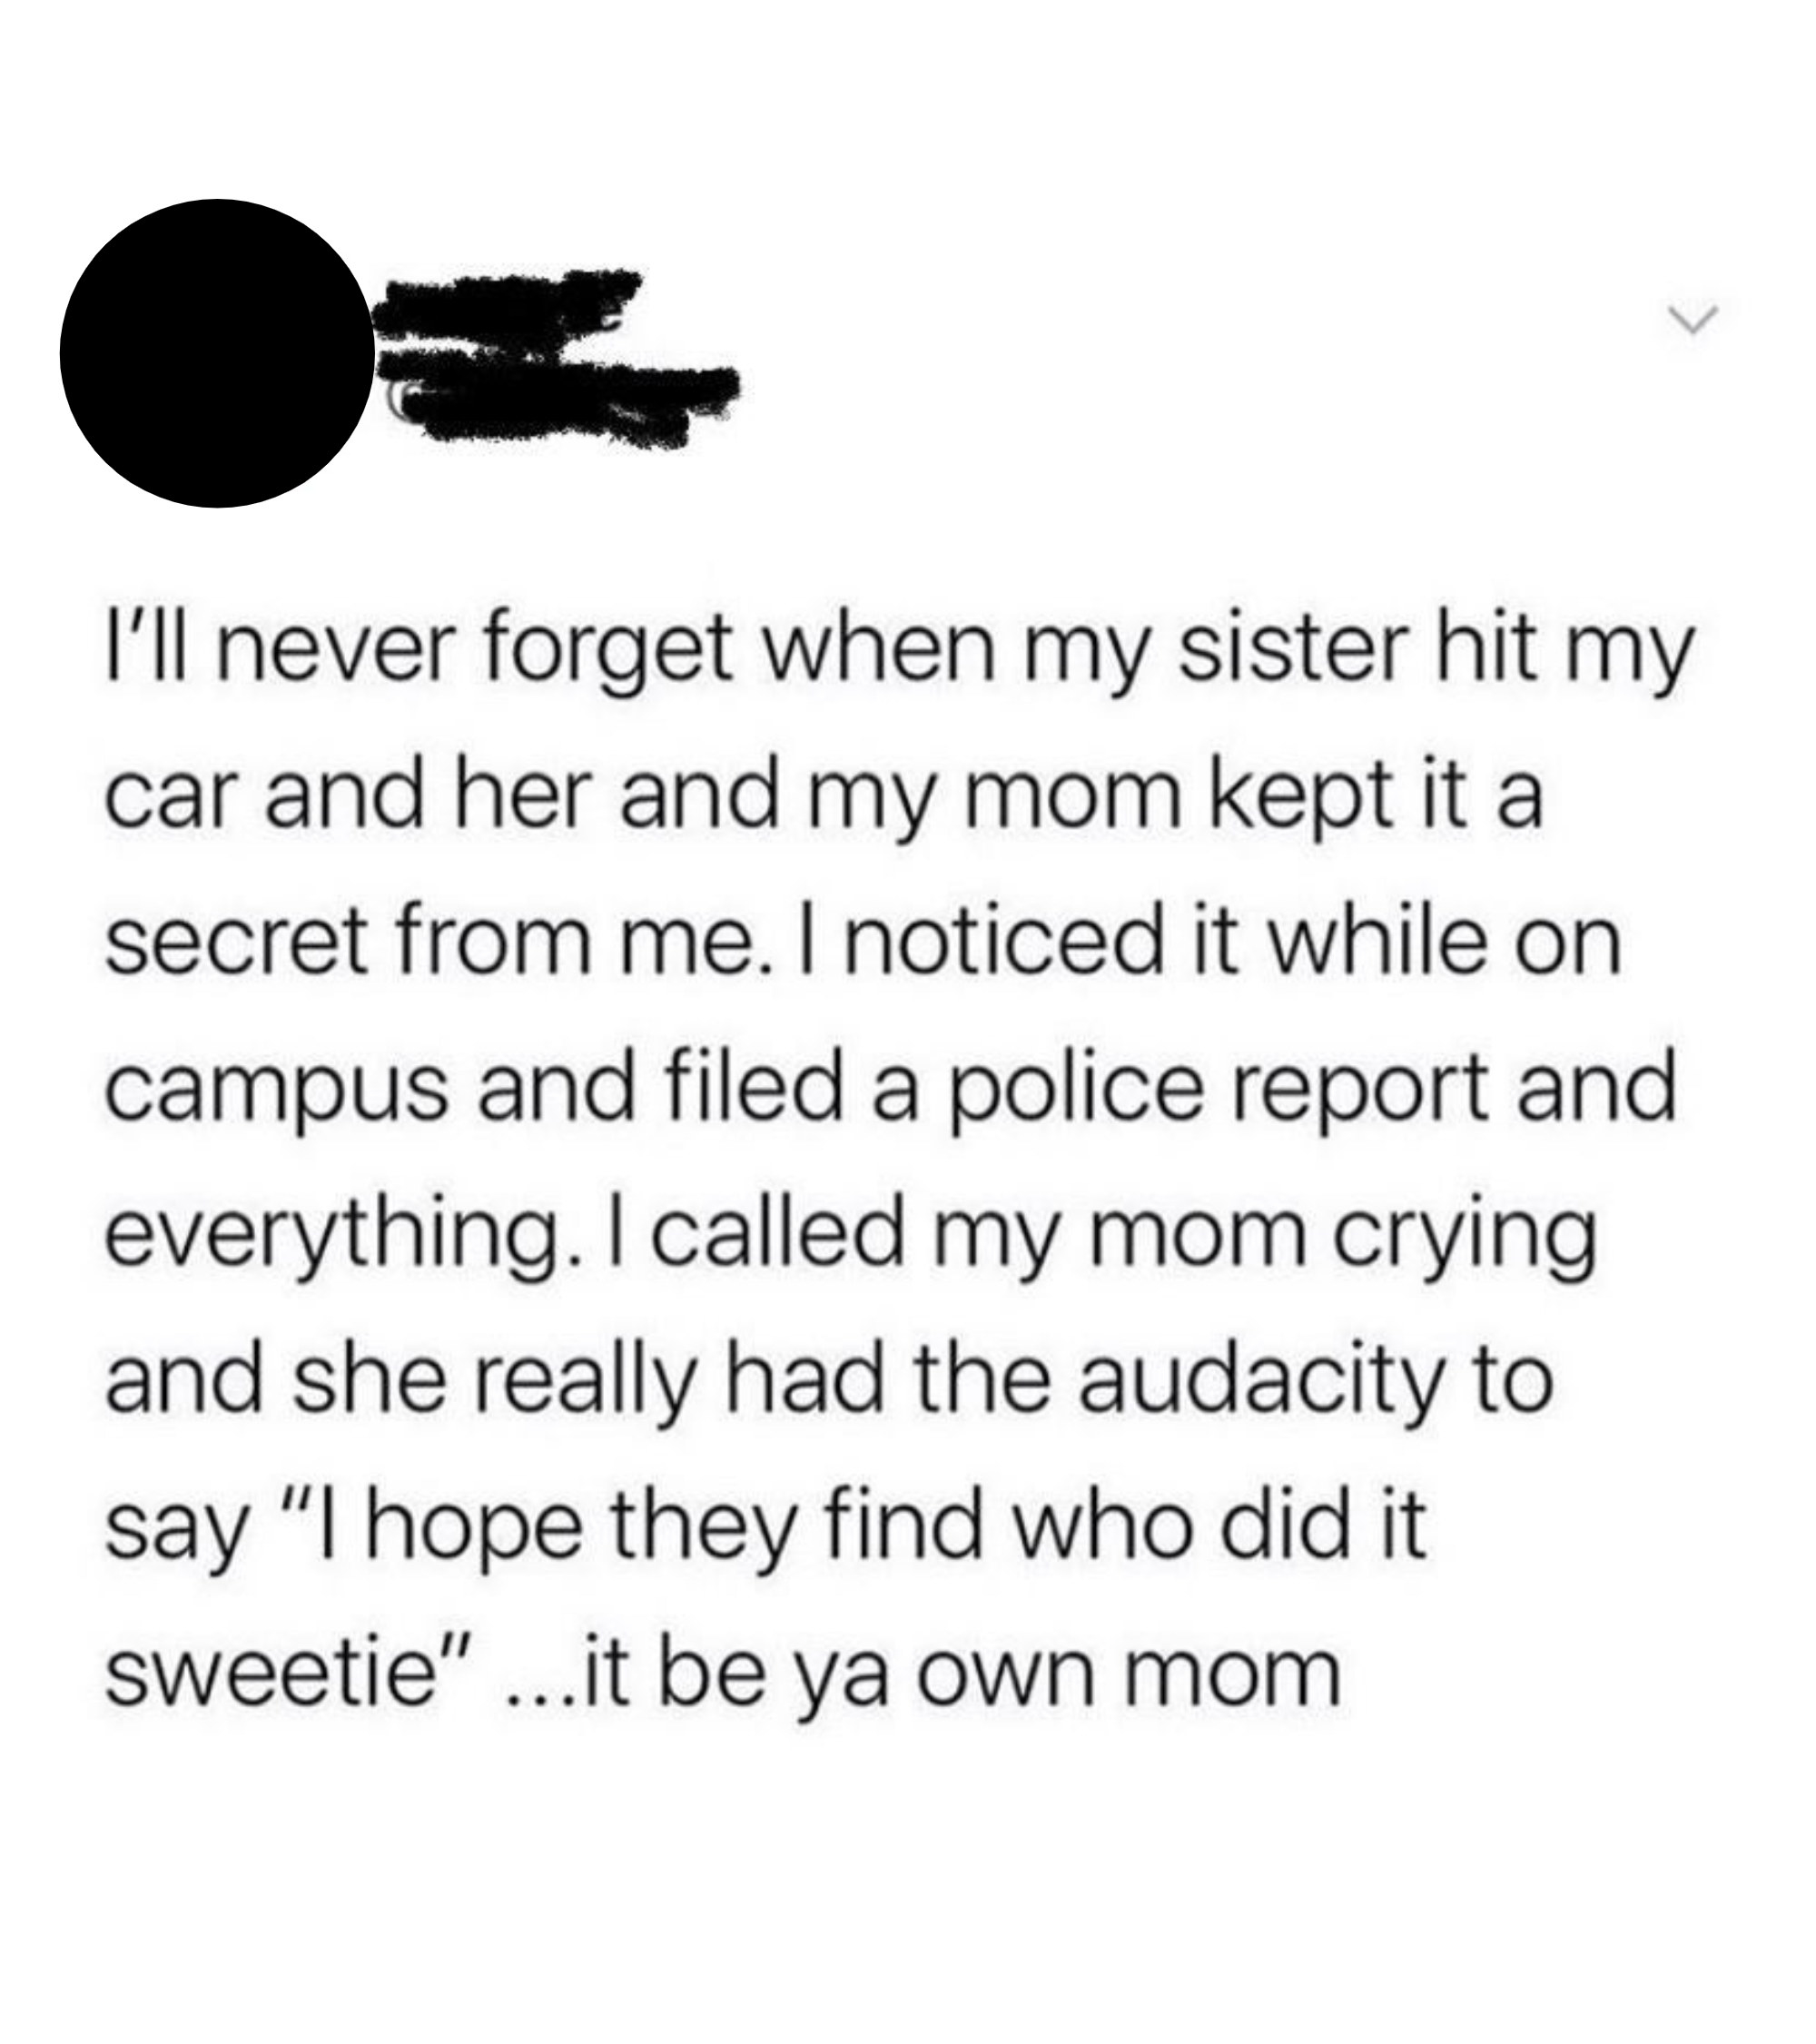 Tweet that reads: &quot;I&#x27;ll never forget when my sister hit my car and her and my mom kept it a secret from me&quot;